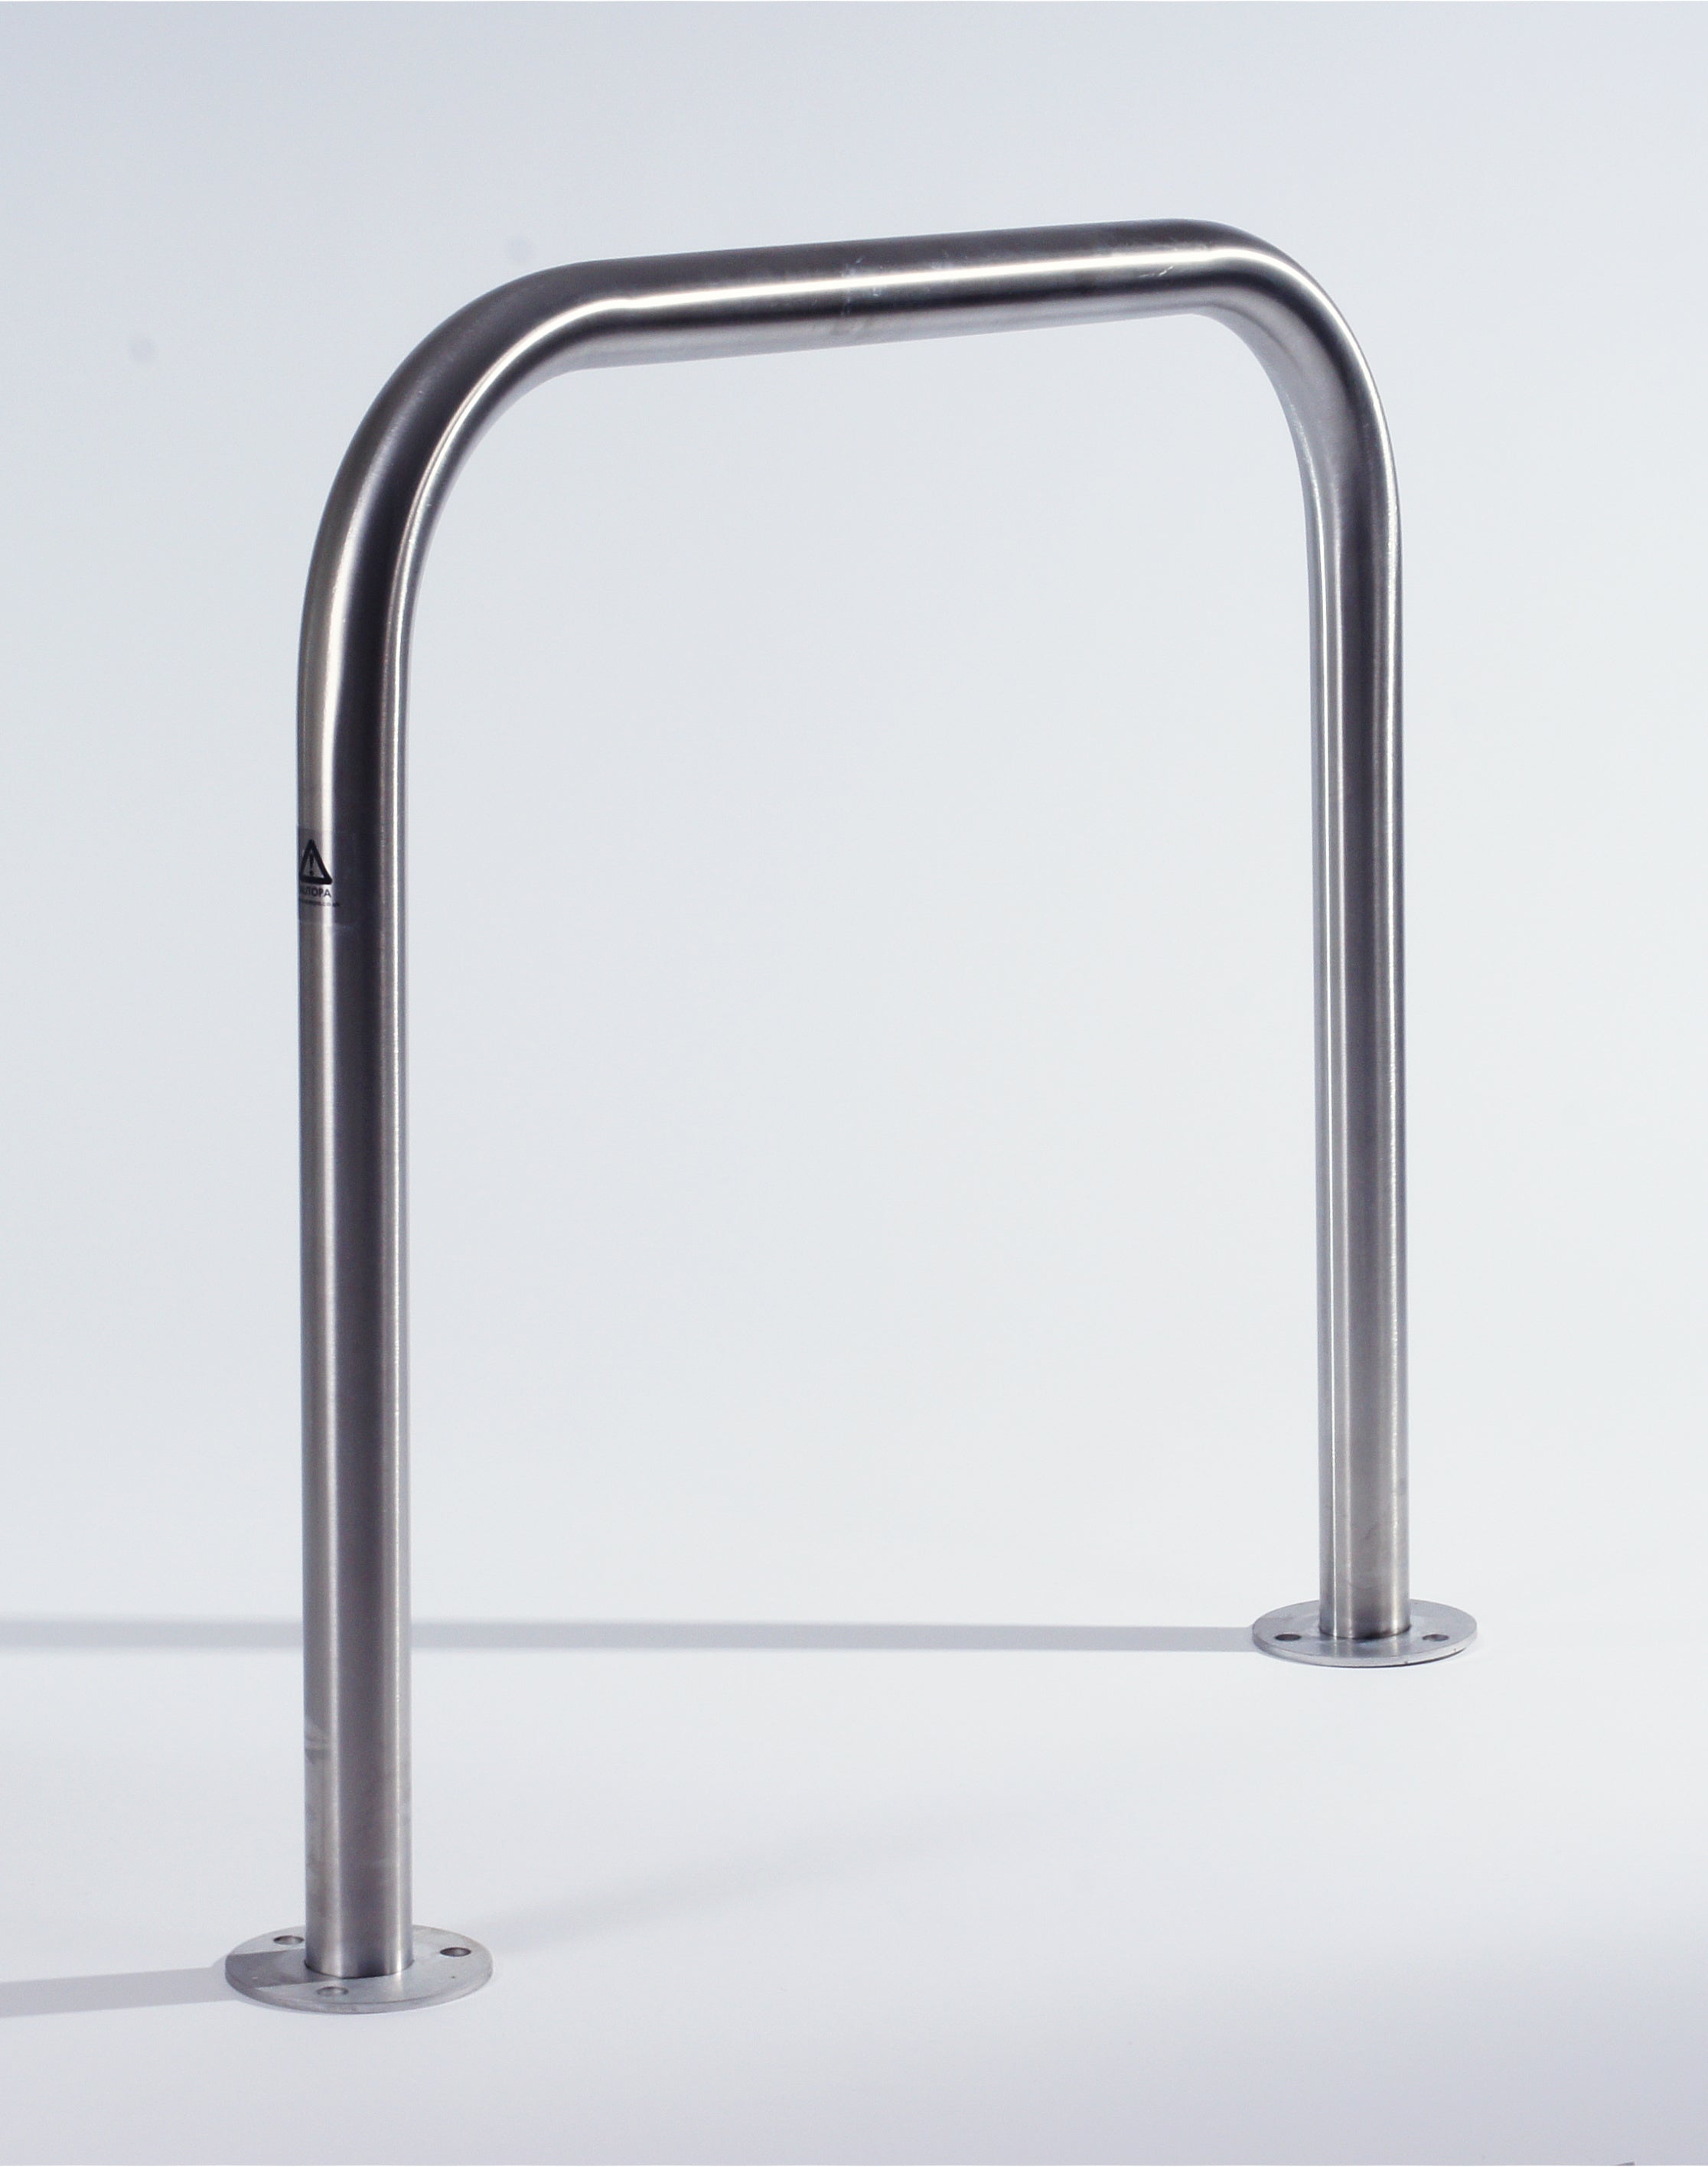 48mm Dia. Sheffield Cycle Stand